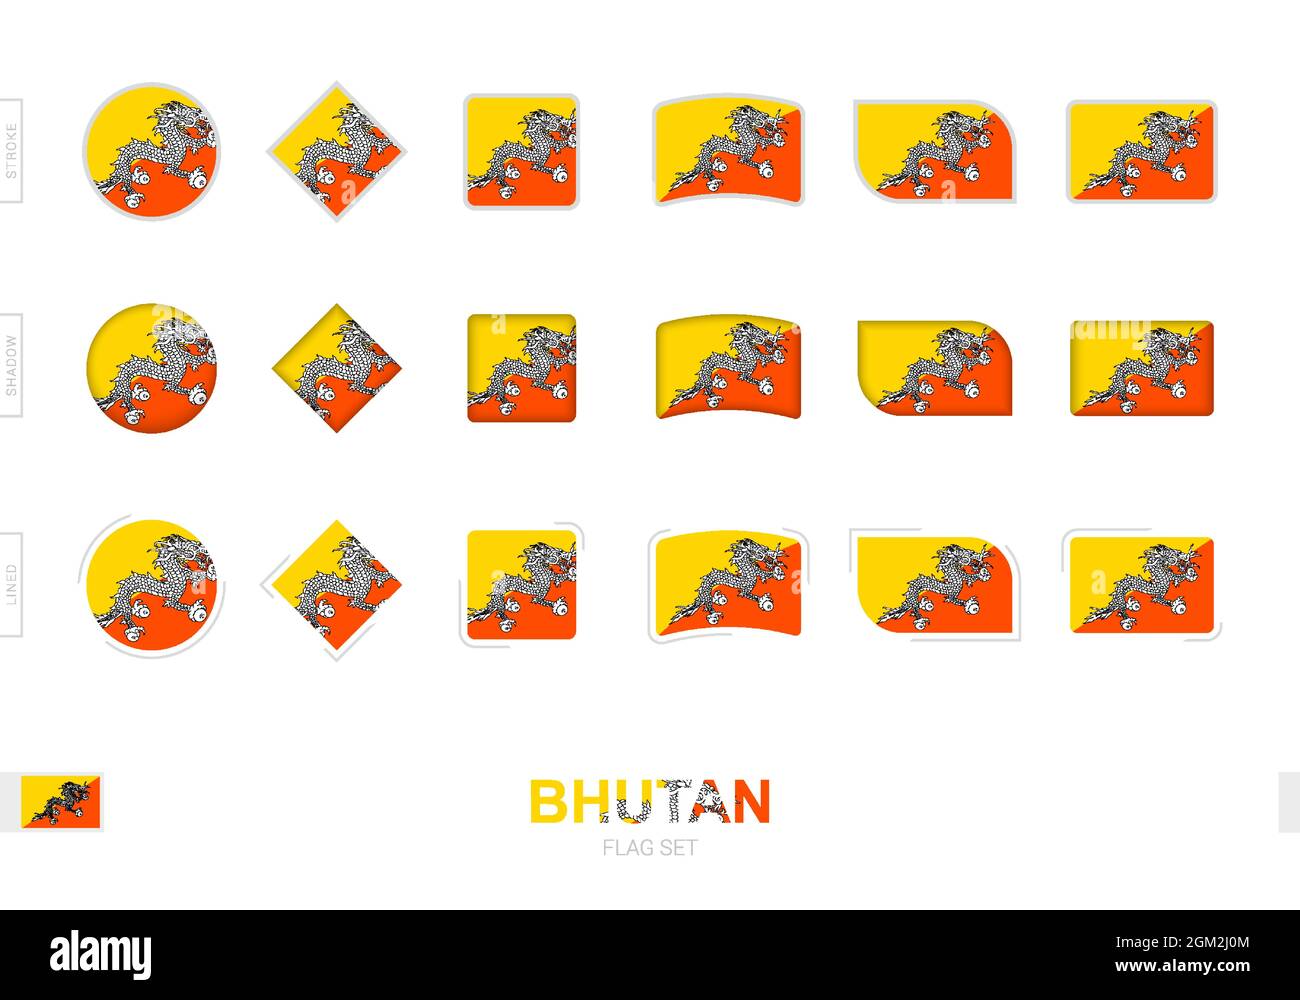 Bhutan Flag Set Simple Flags Of Bhutan With Three Different Effects Vector Illustration Stock 